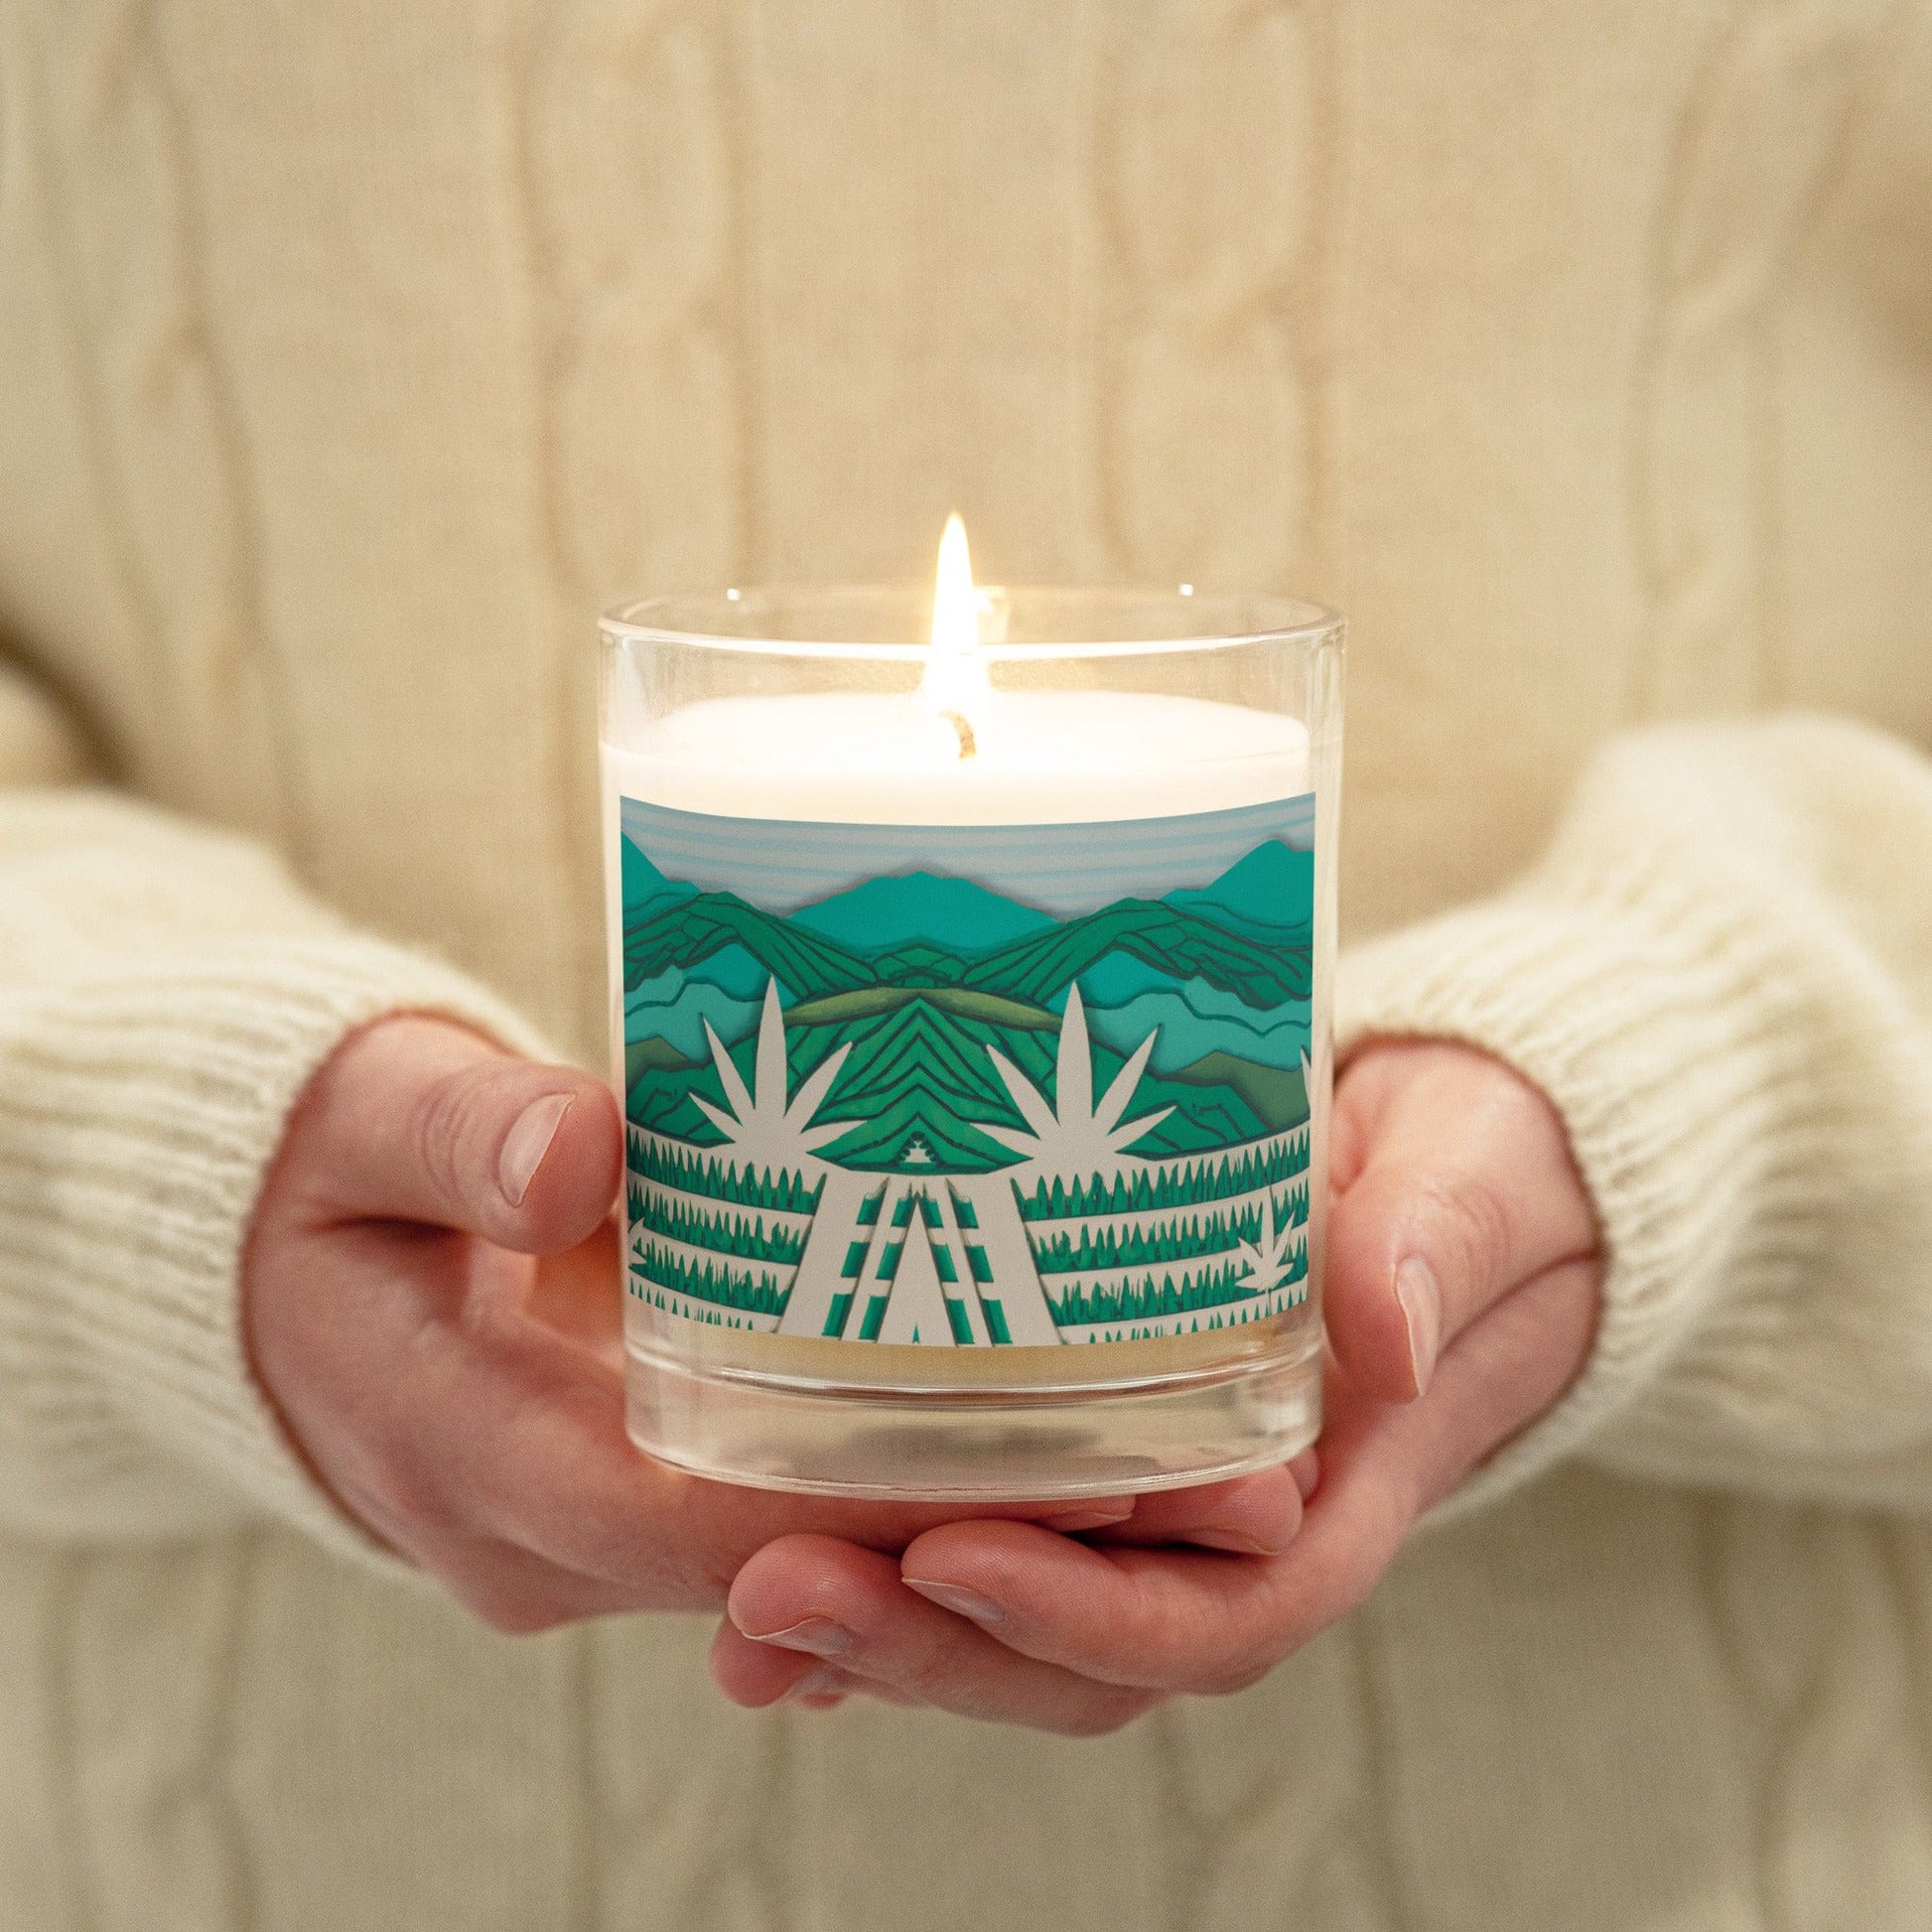 CannaCult - Paper Weed Farm Candle